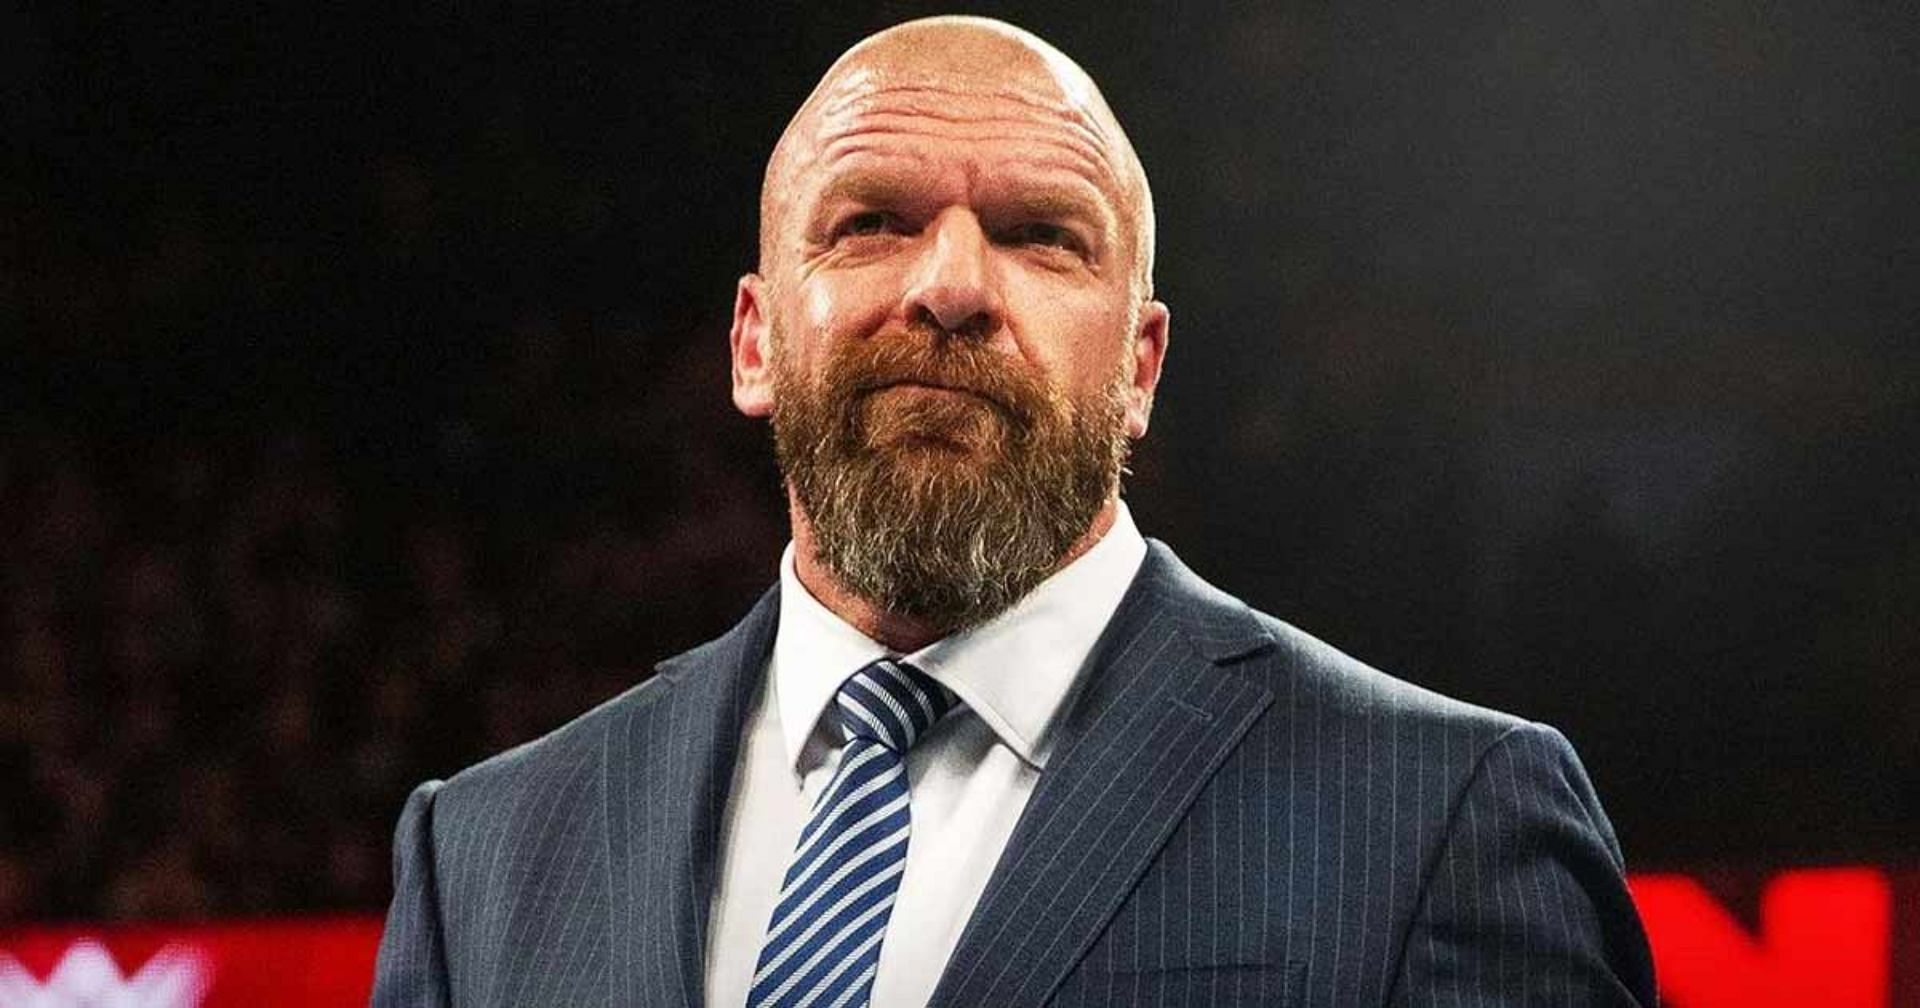 Triple H sees big things ahead for a 29-year-old WWE star.